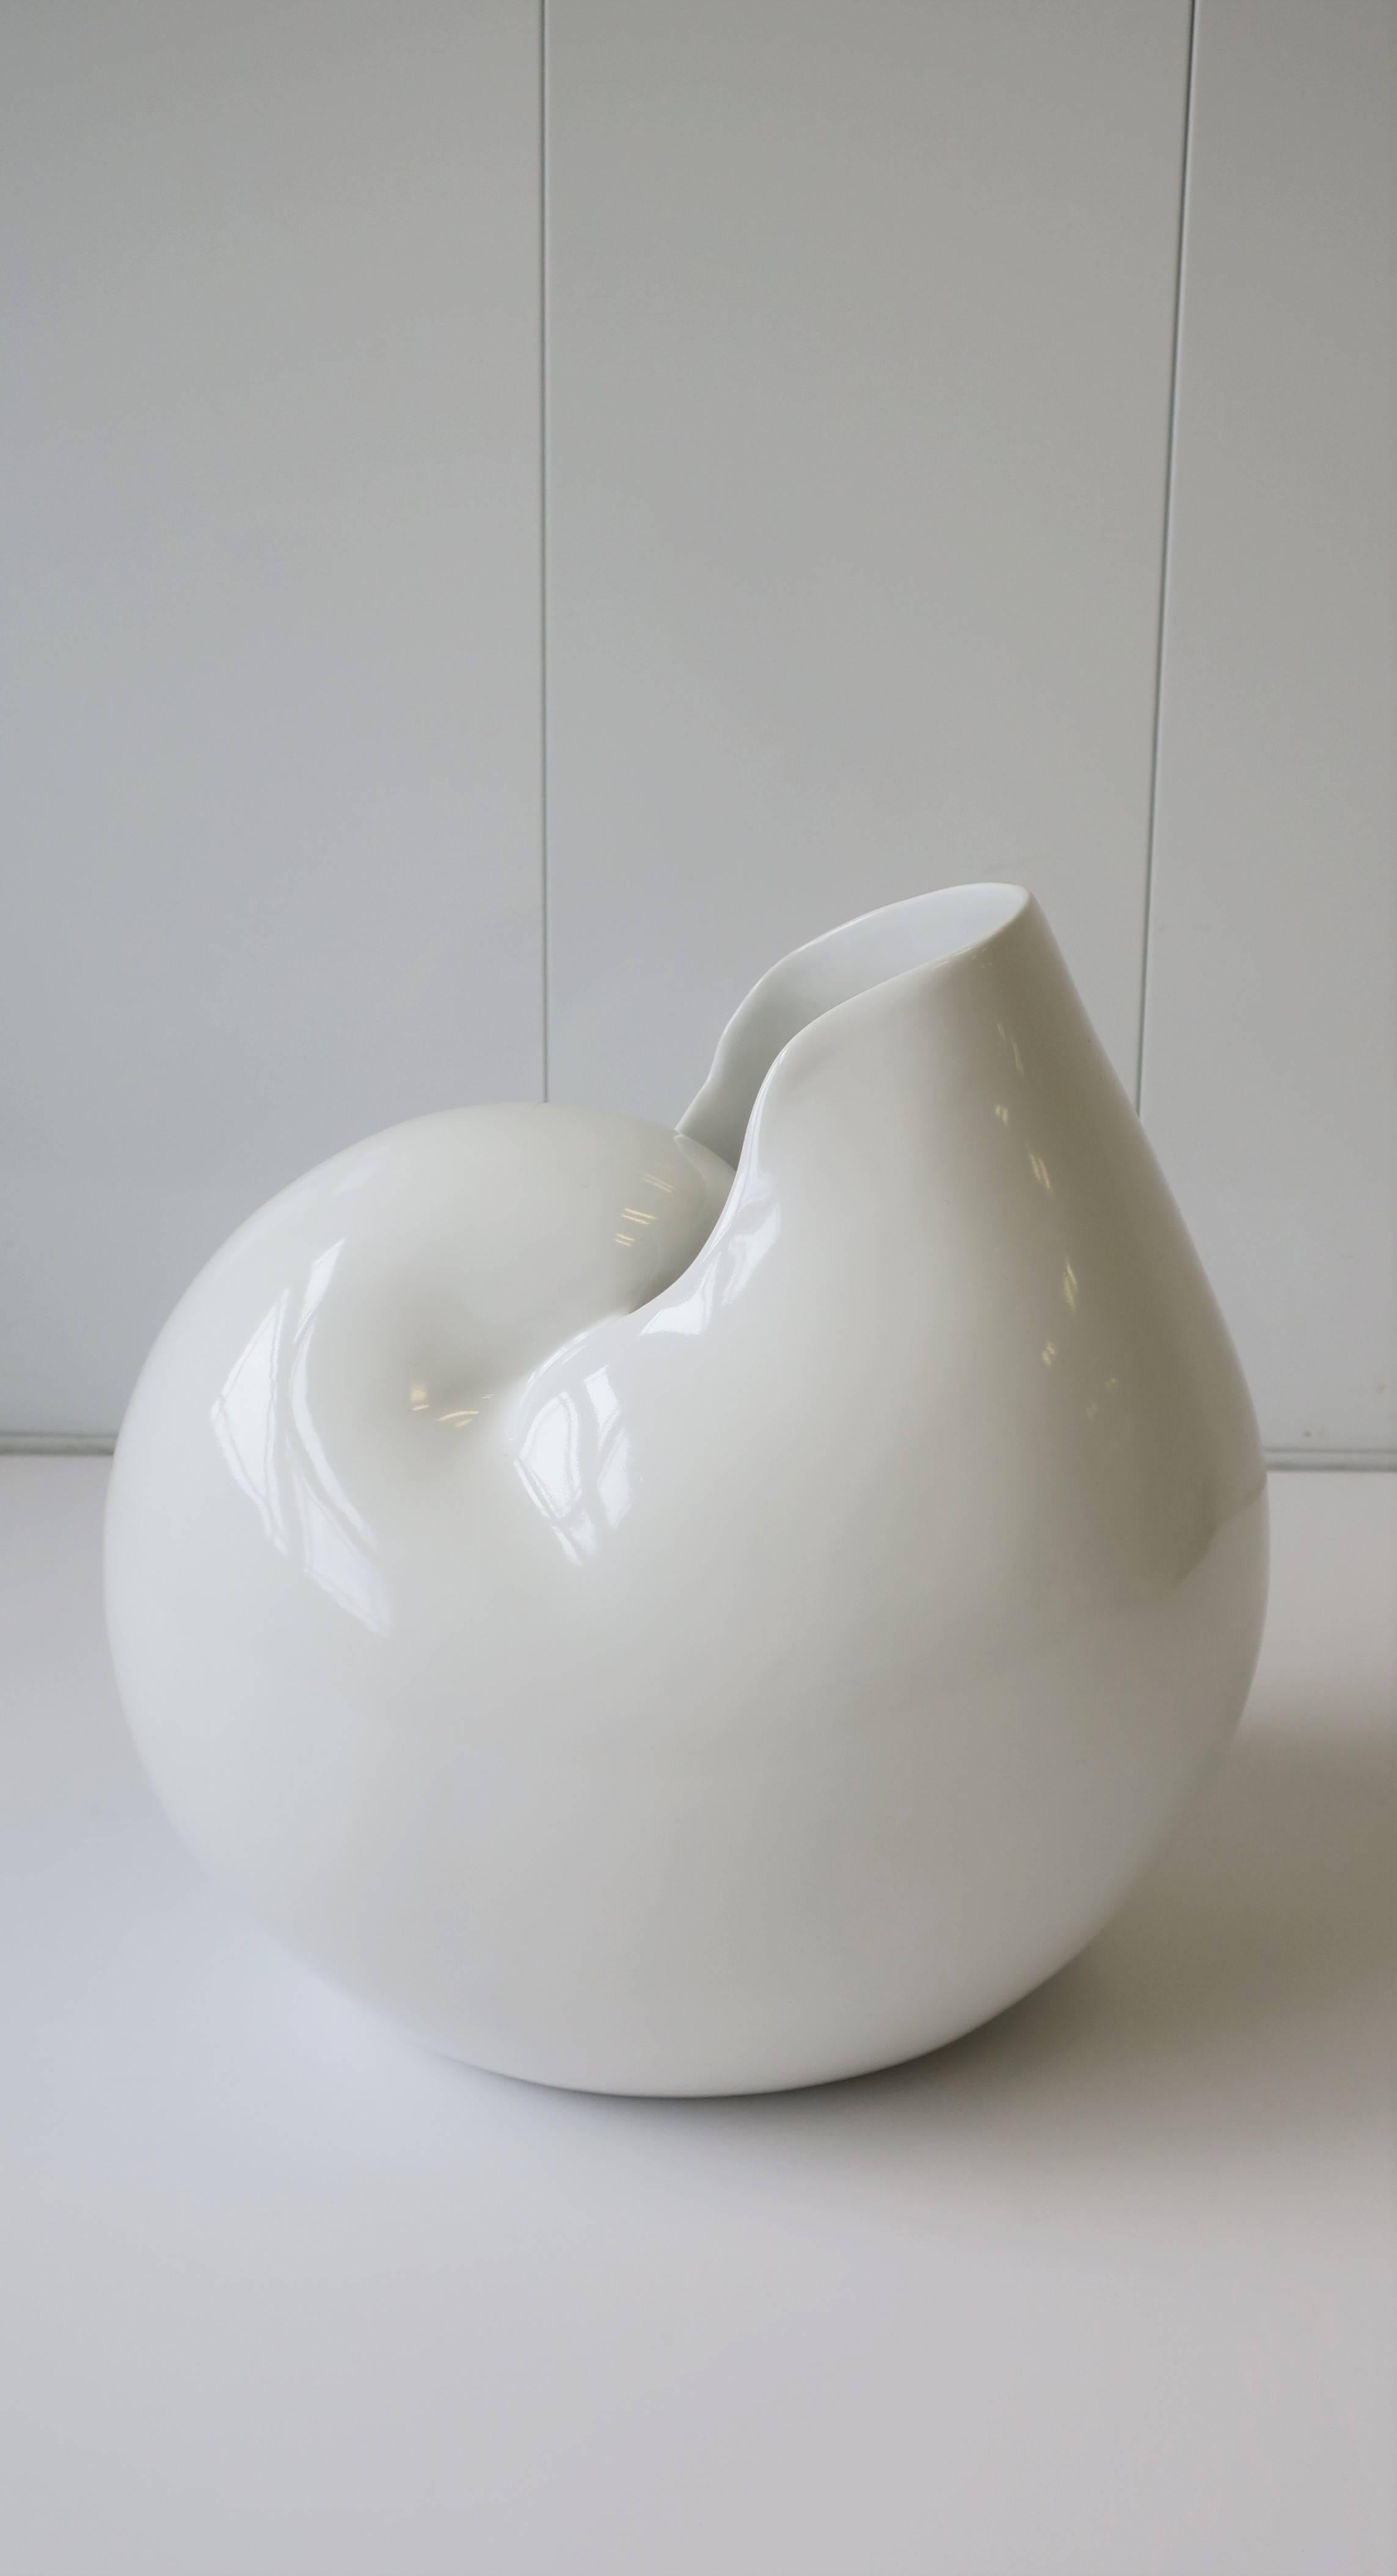 A large vintage Italian white ceramic nautilus sea shell centrepiece sculpture, circa late 20th century, Italy. This large seashell sculpture is a beautiful standalone piece, but can also act as a vase/vessel to hold flowers or other. 

Piece